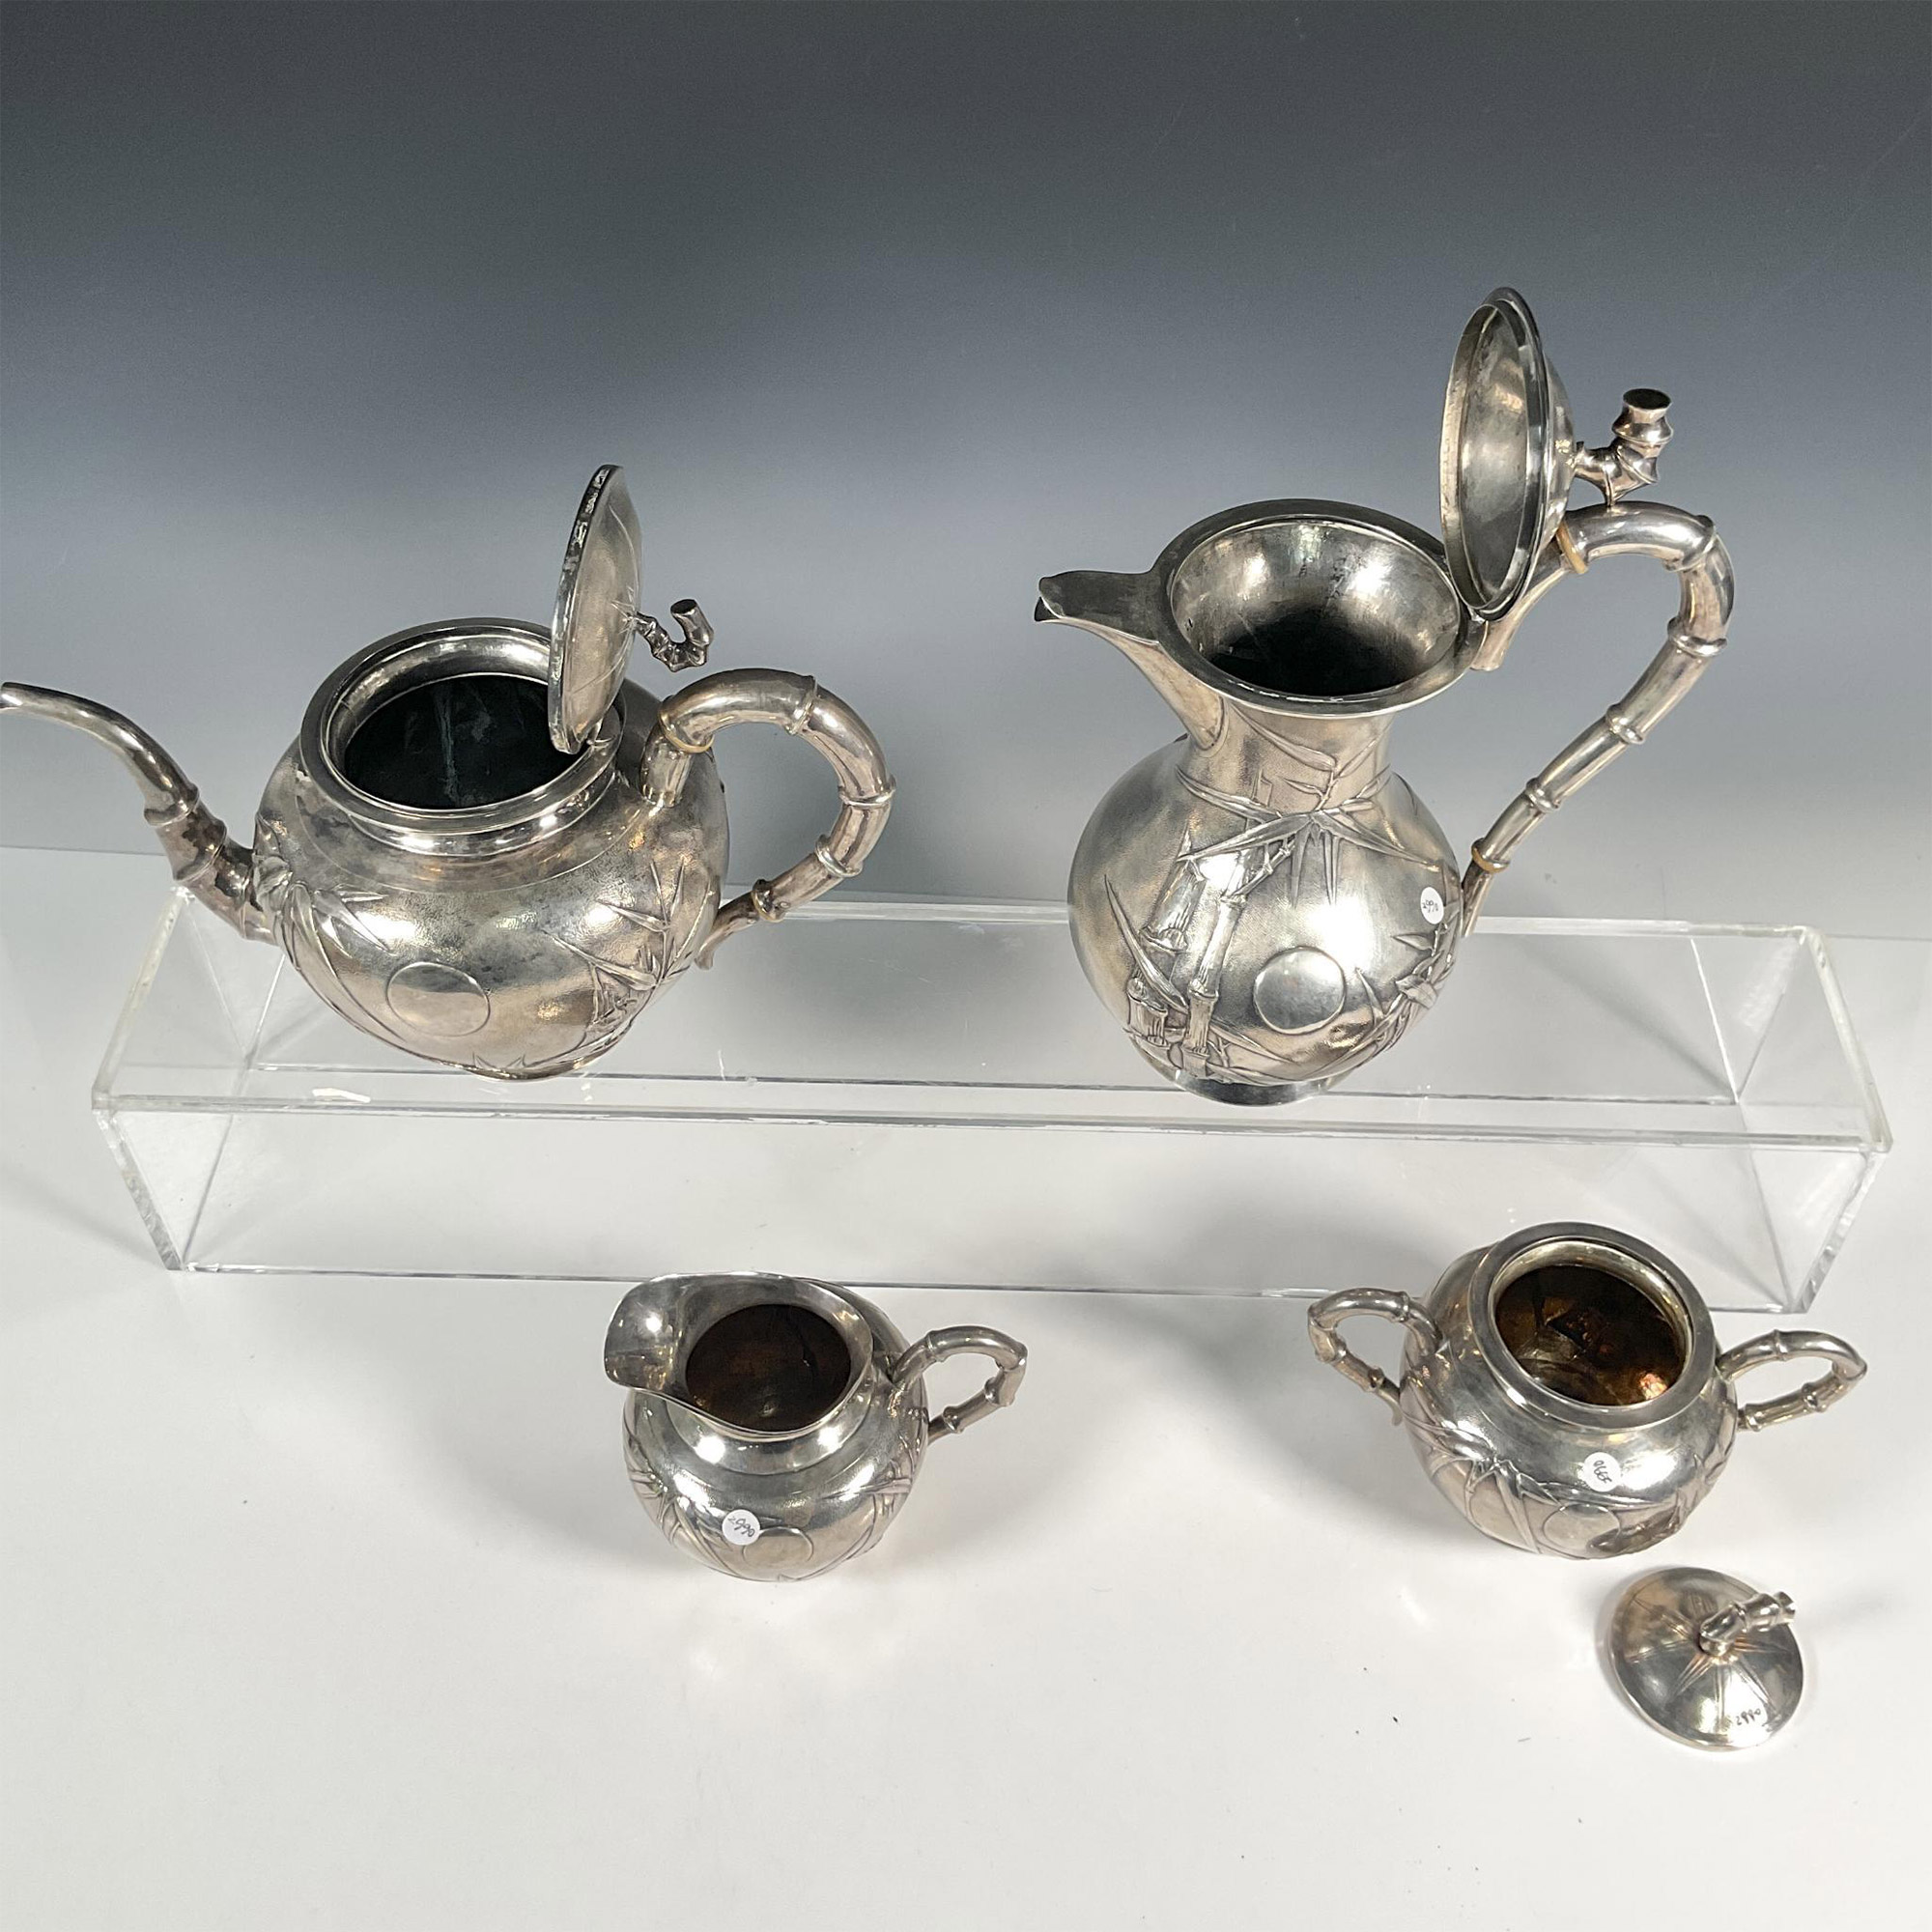 4pc Chinese Export Silver Tea and Coffee Service Set - Image 4 of 8